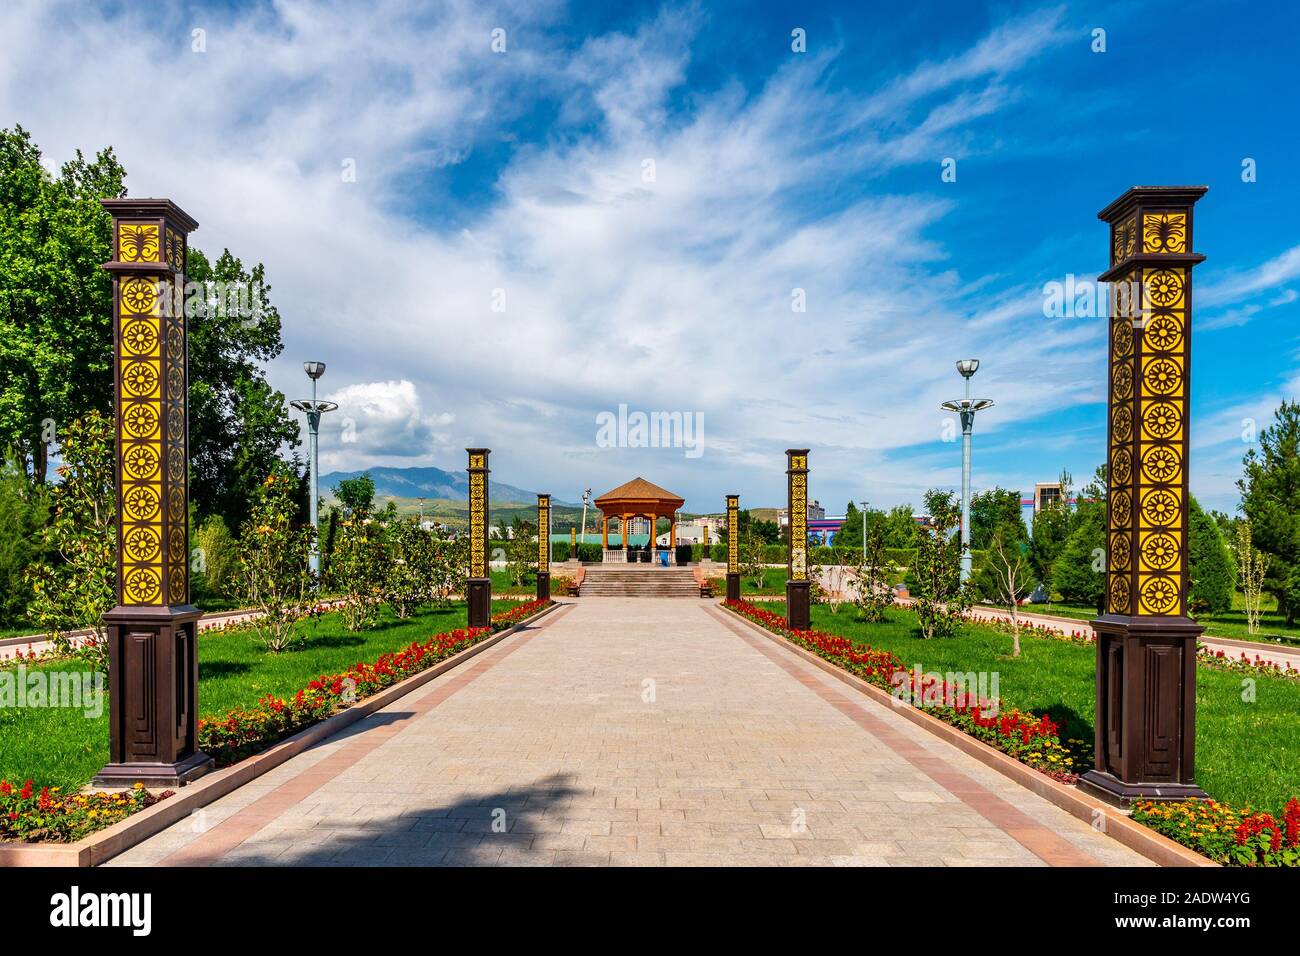 Dushanbe Youth Park Picturesque Leading Lines View of Pavilion with Street Lights on a Sunny Blue Sky Day Stock Photo